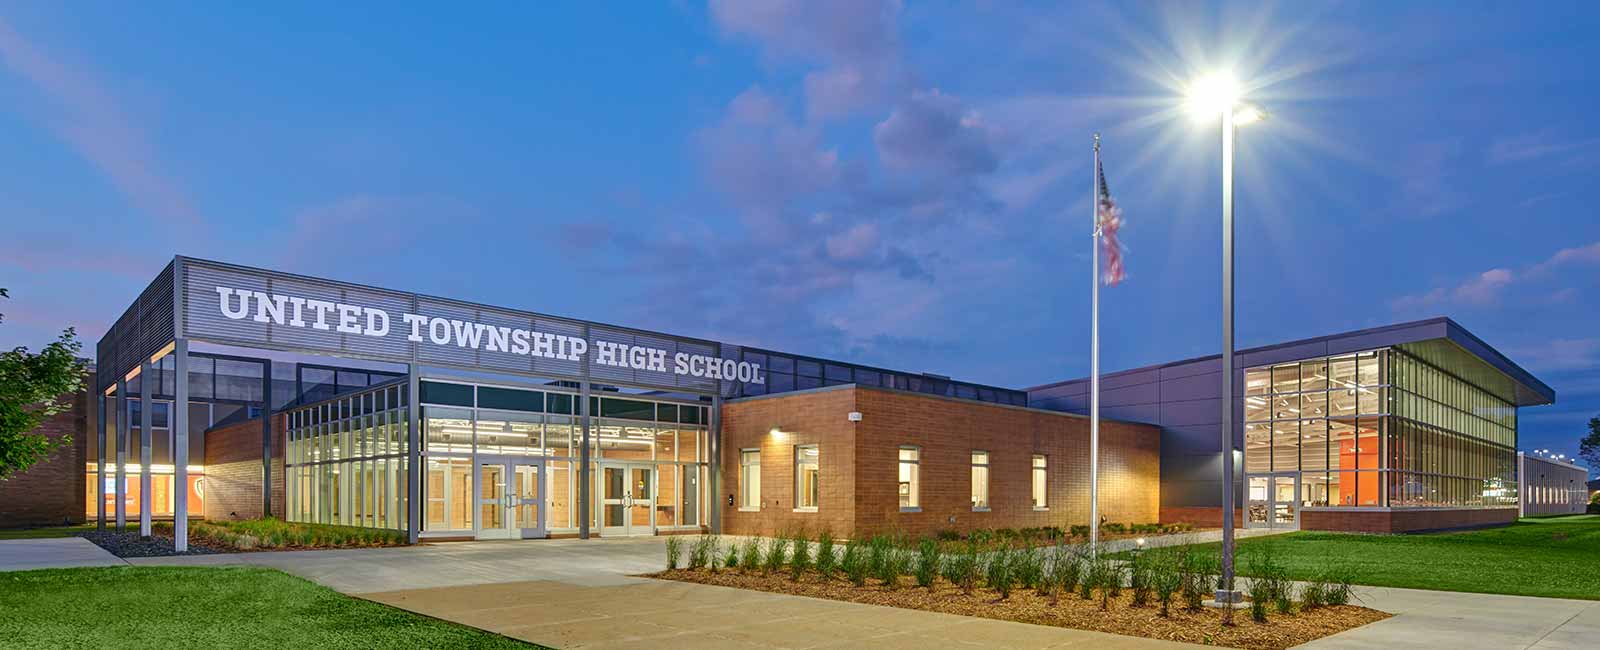 United Township High School – Student Life Center